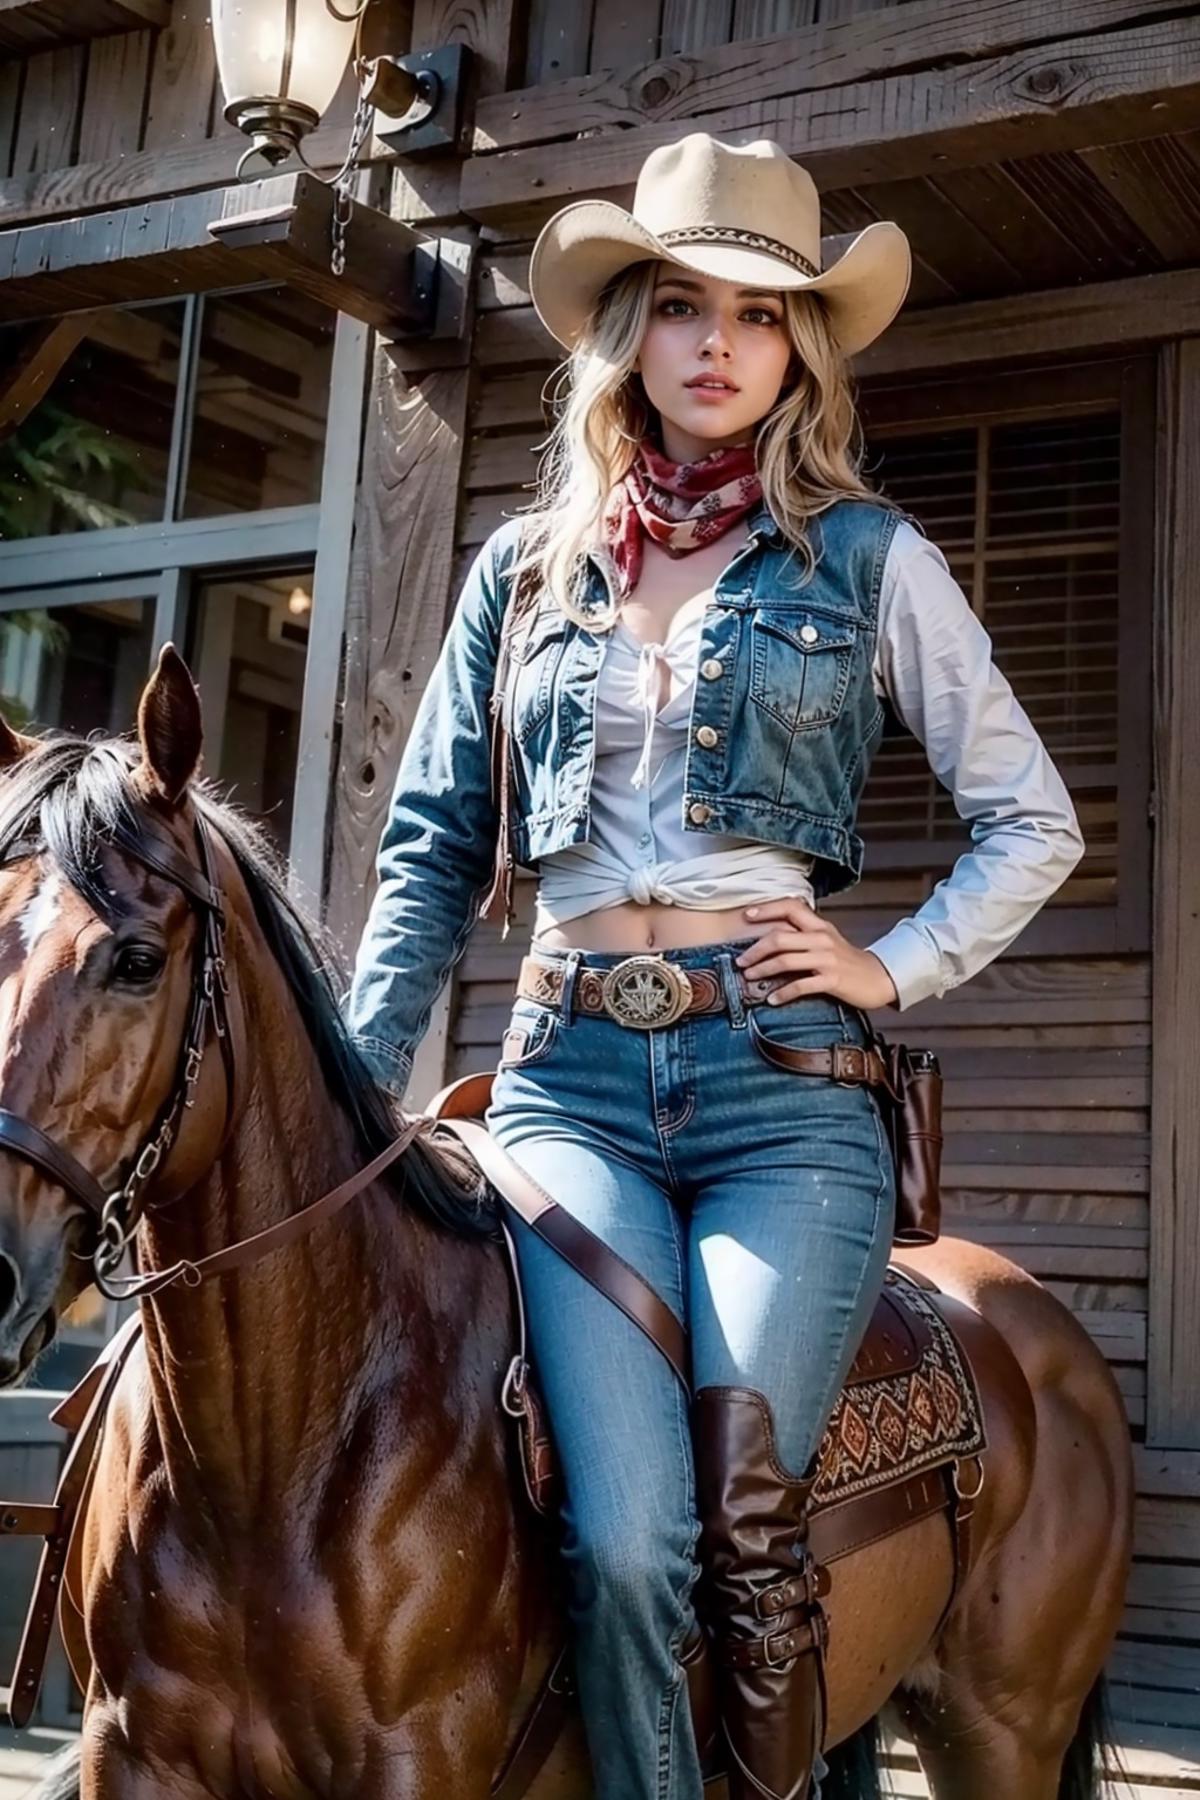 Cowgirl outfit image by feetie